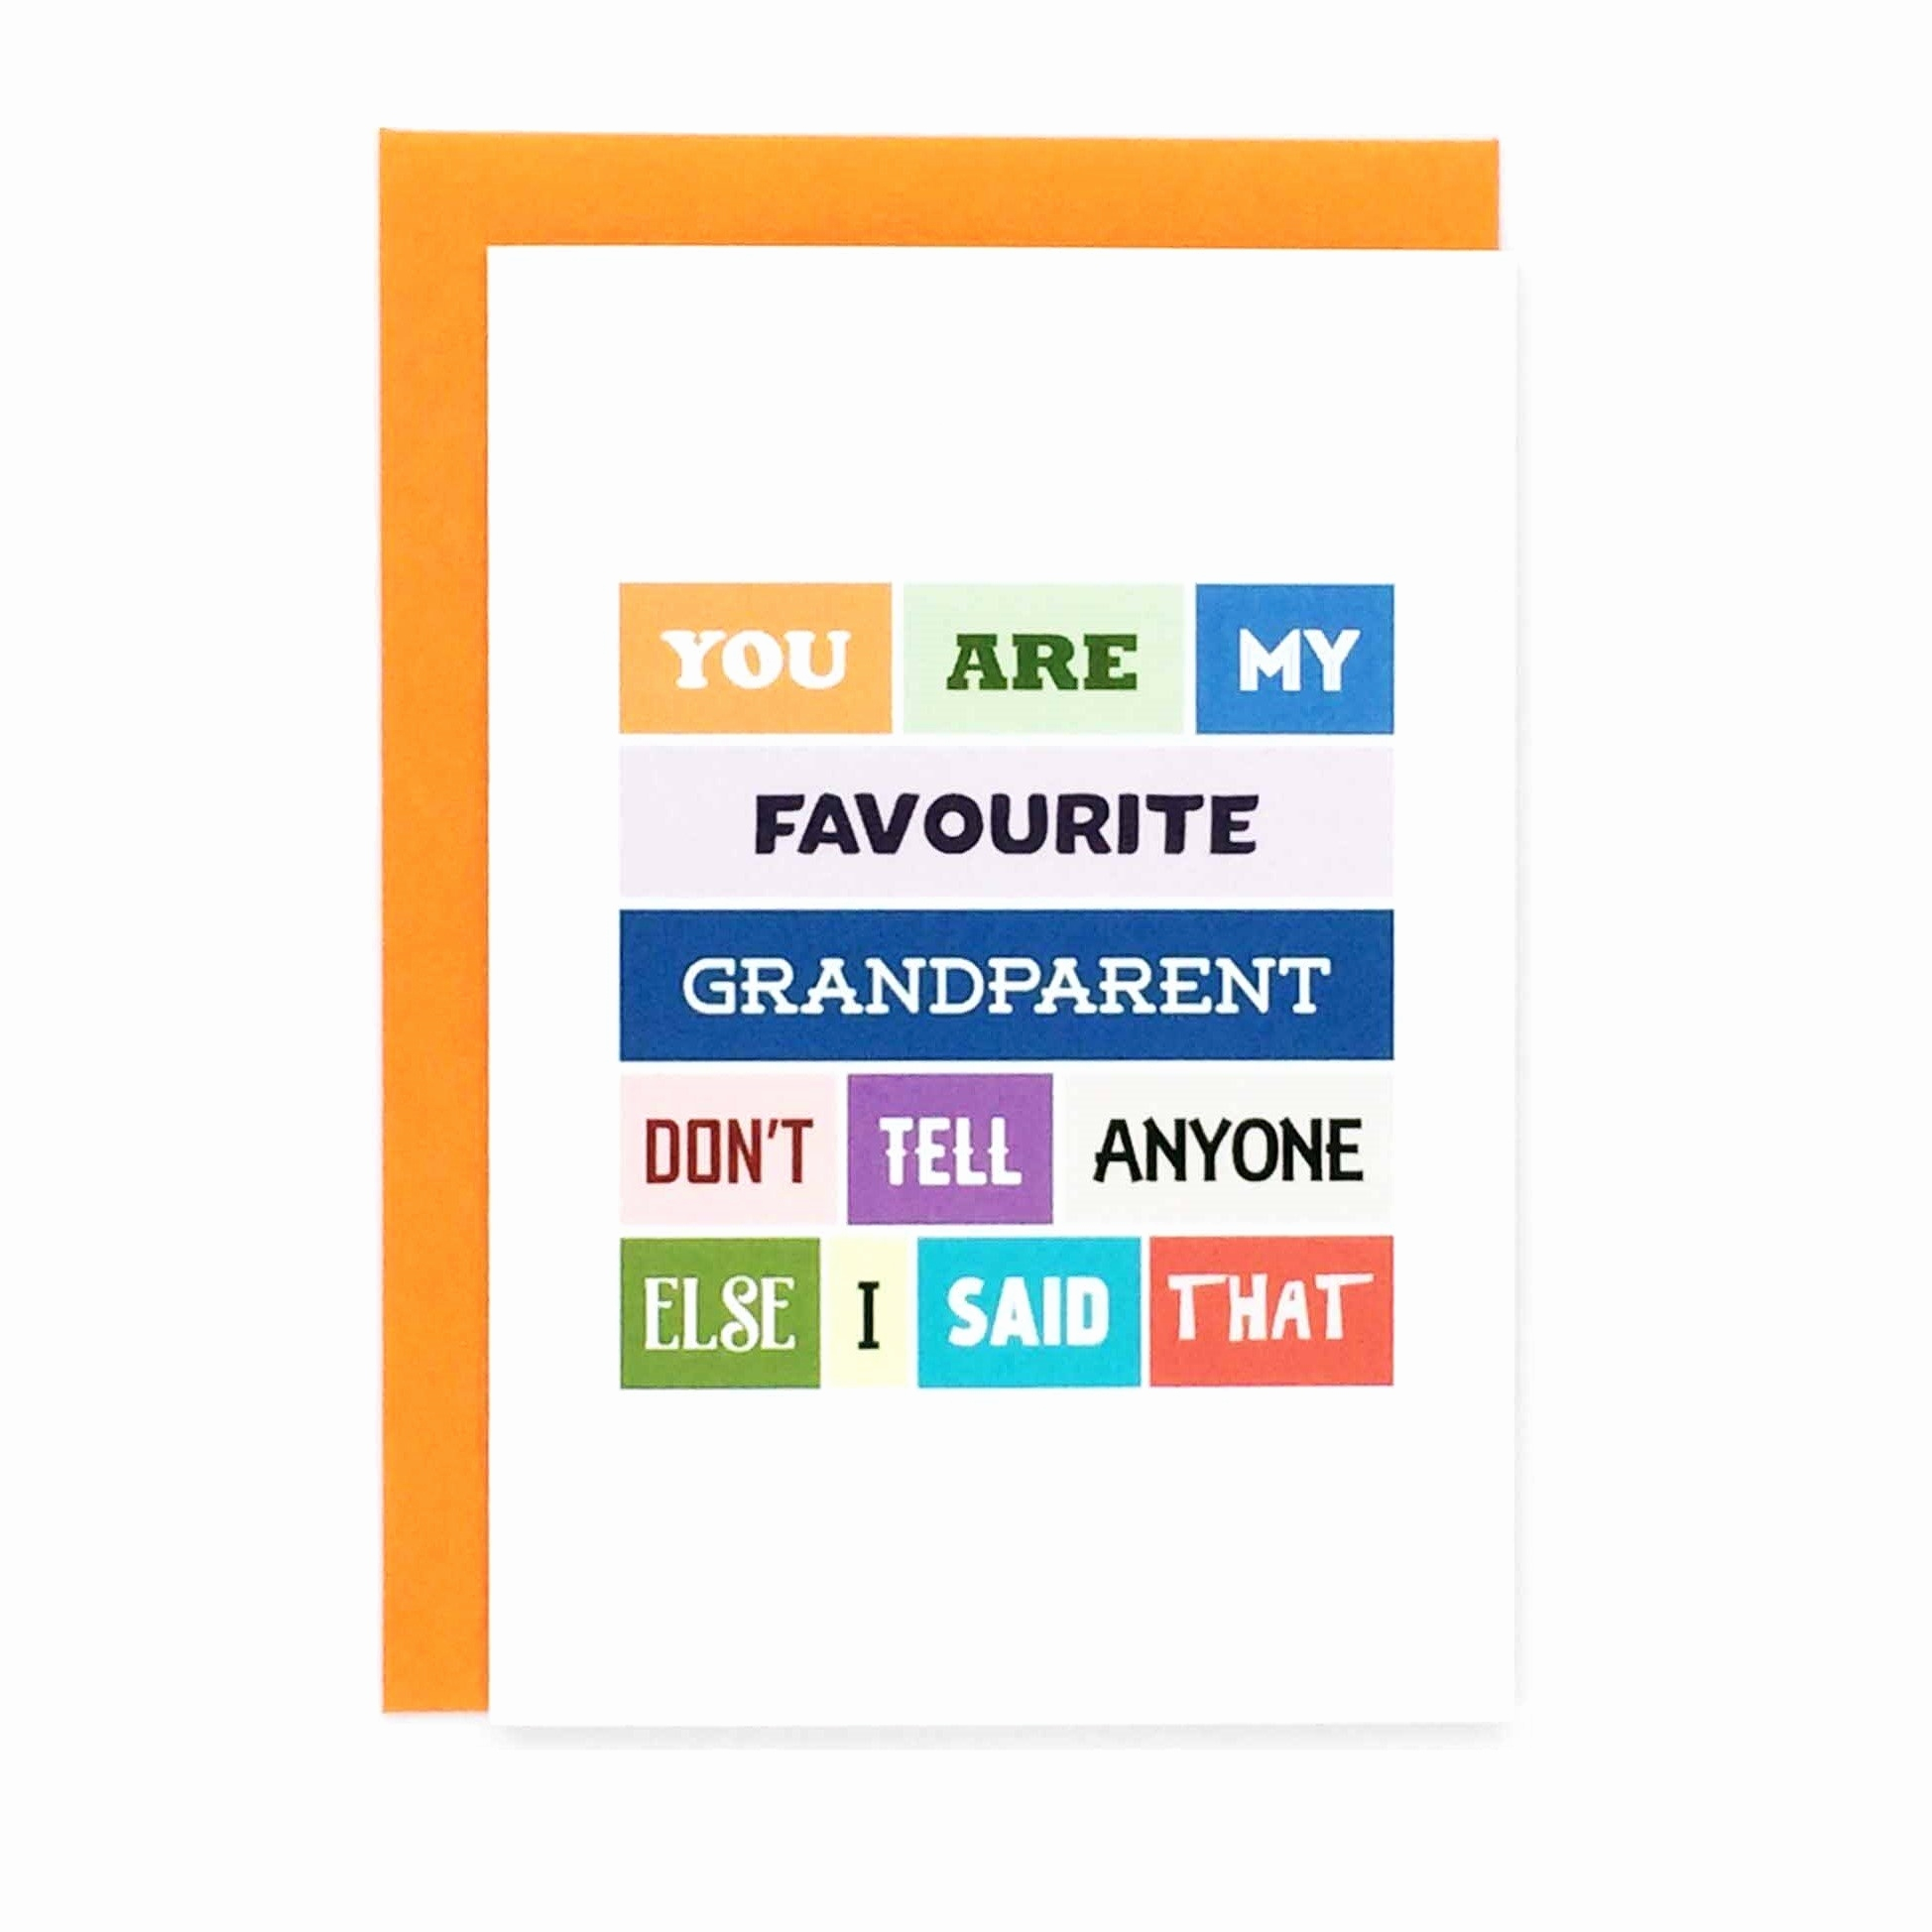 Ideas For Birthday Cards For Grandpa Birthday Card Ideas For A Grandpa Cards Pinterest High Quality From